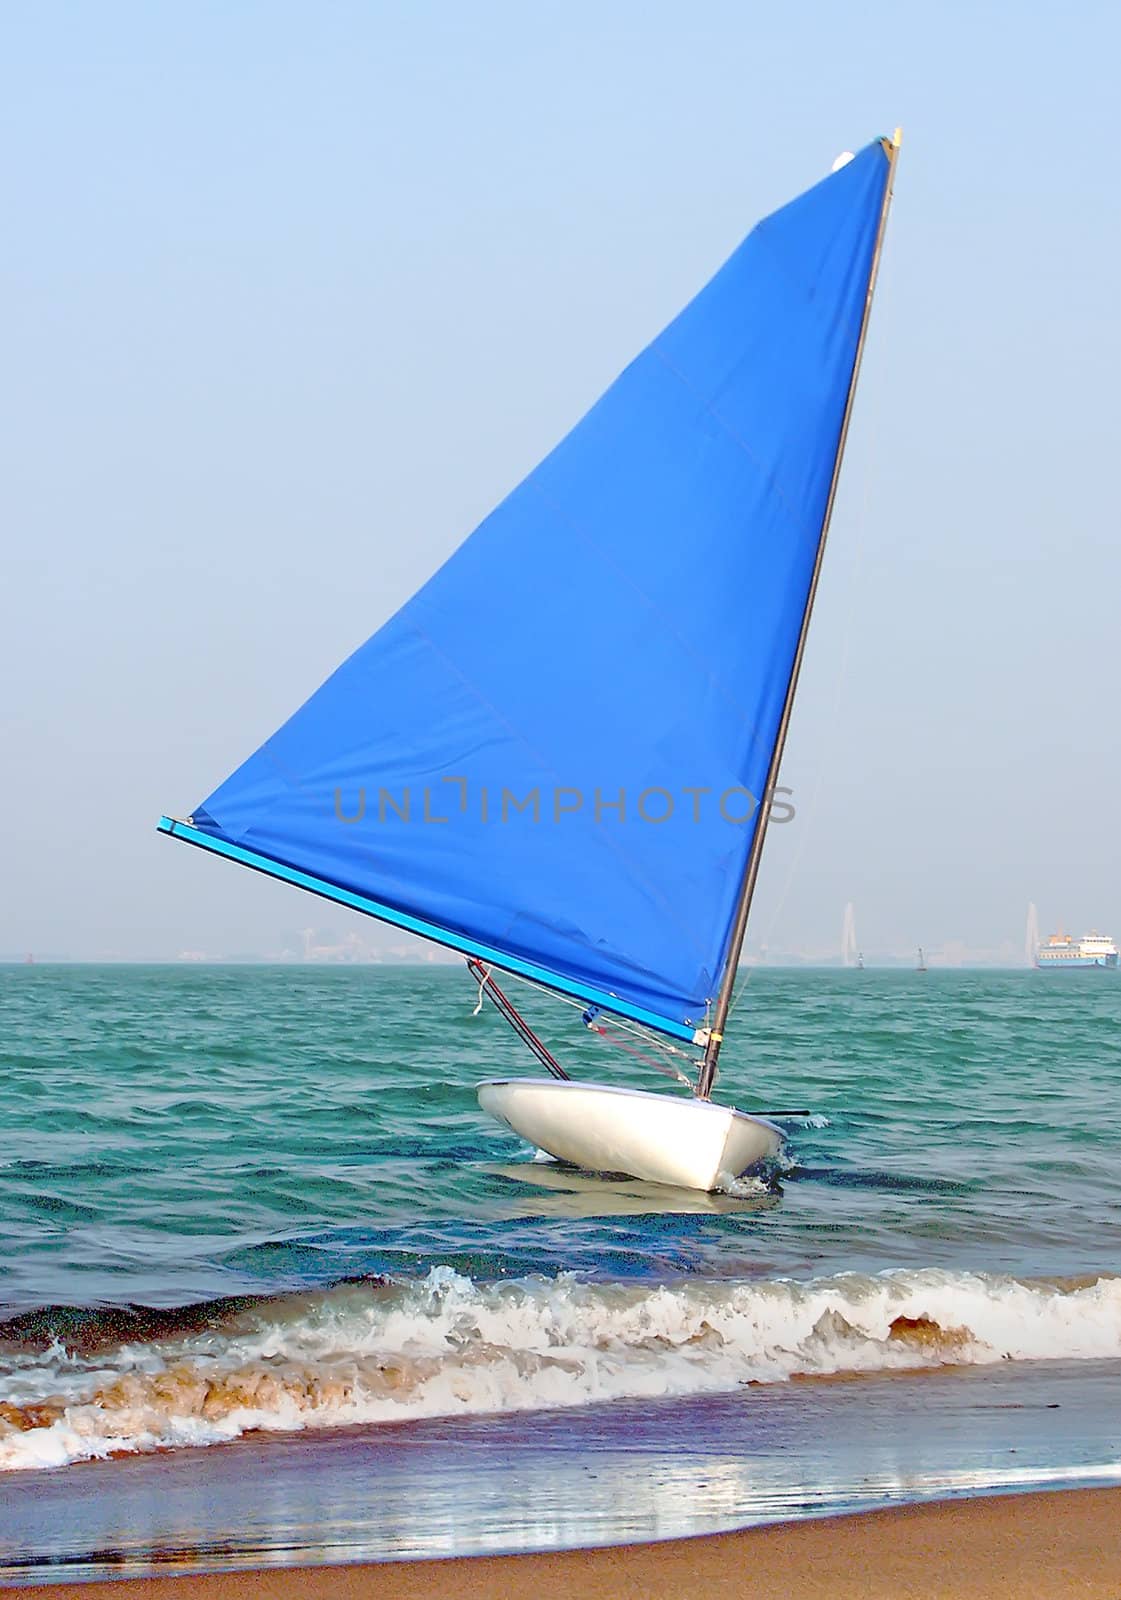 Sailboat by xfdly5